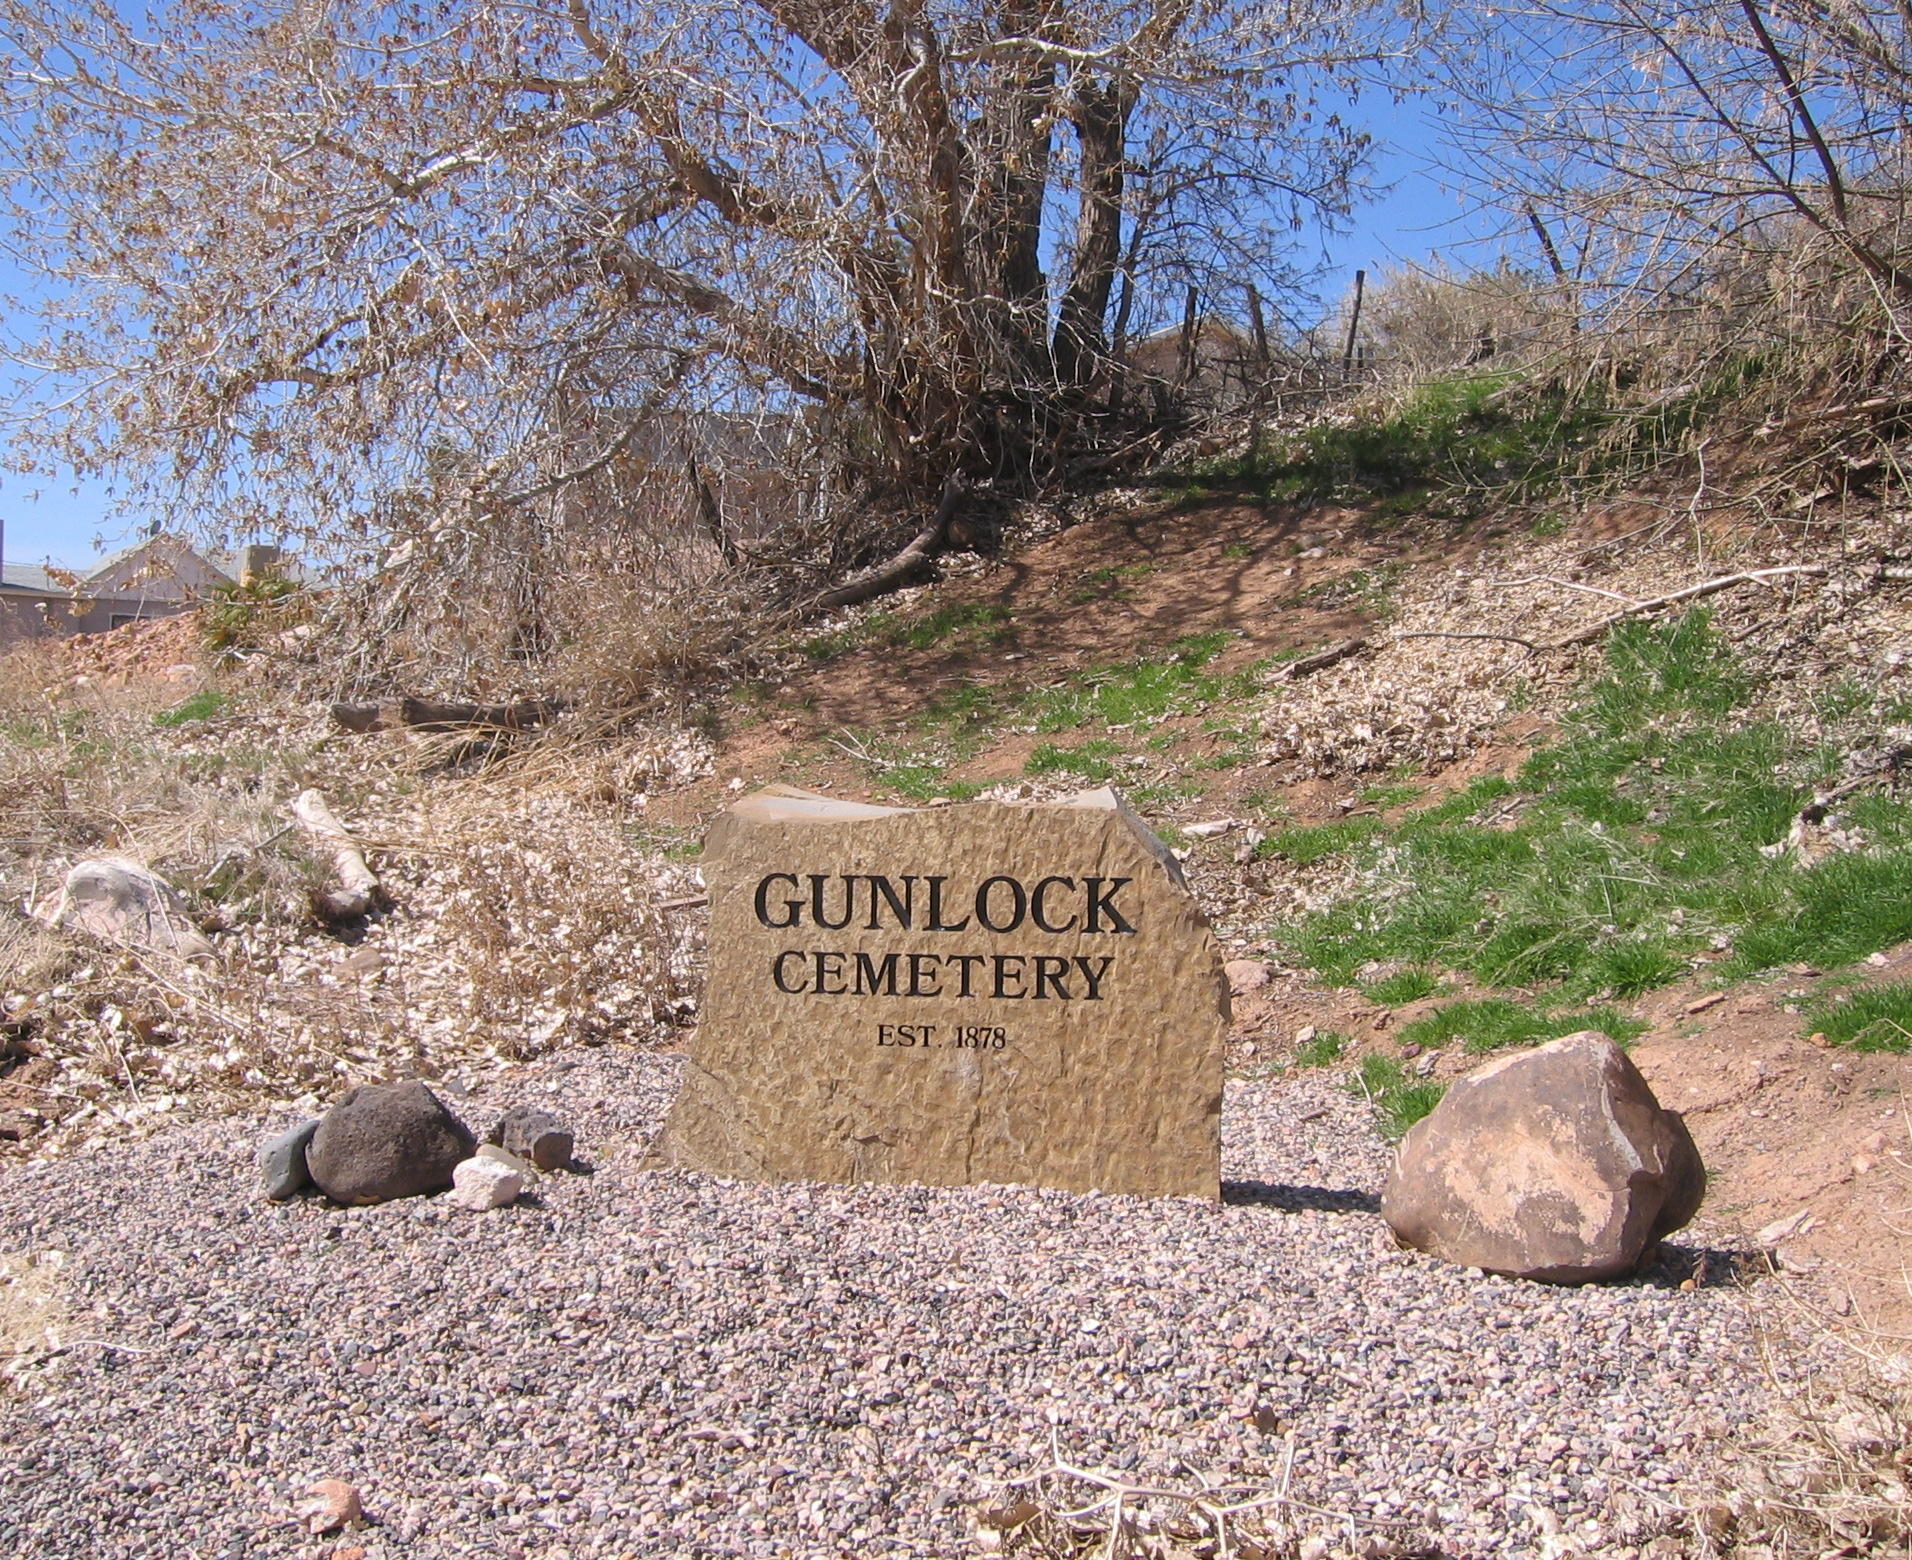 Cemetery sign out on Main Street